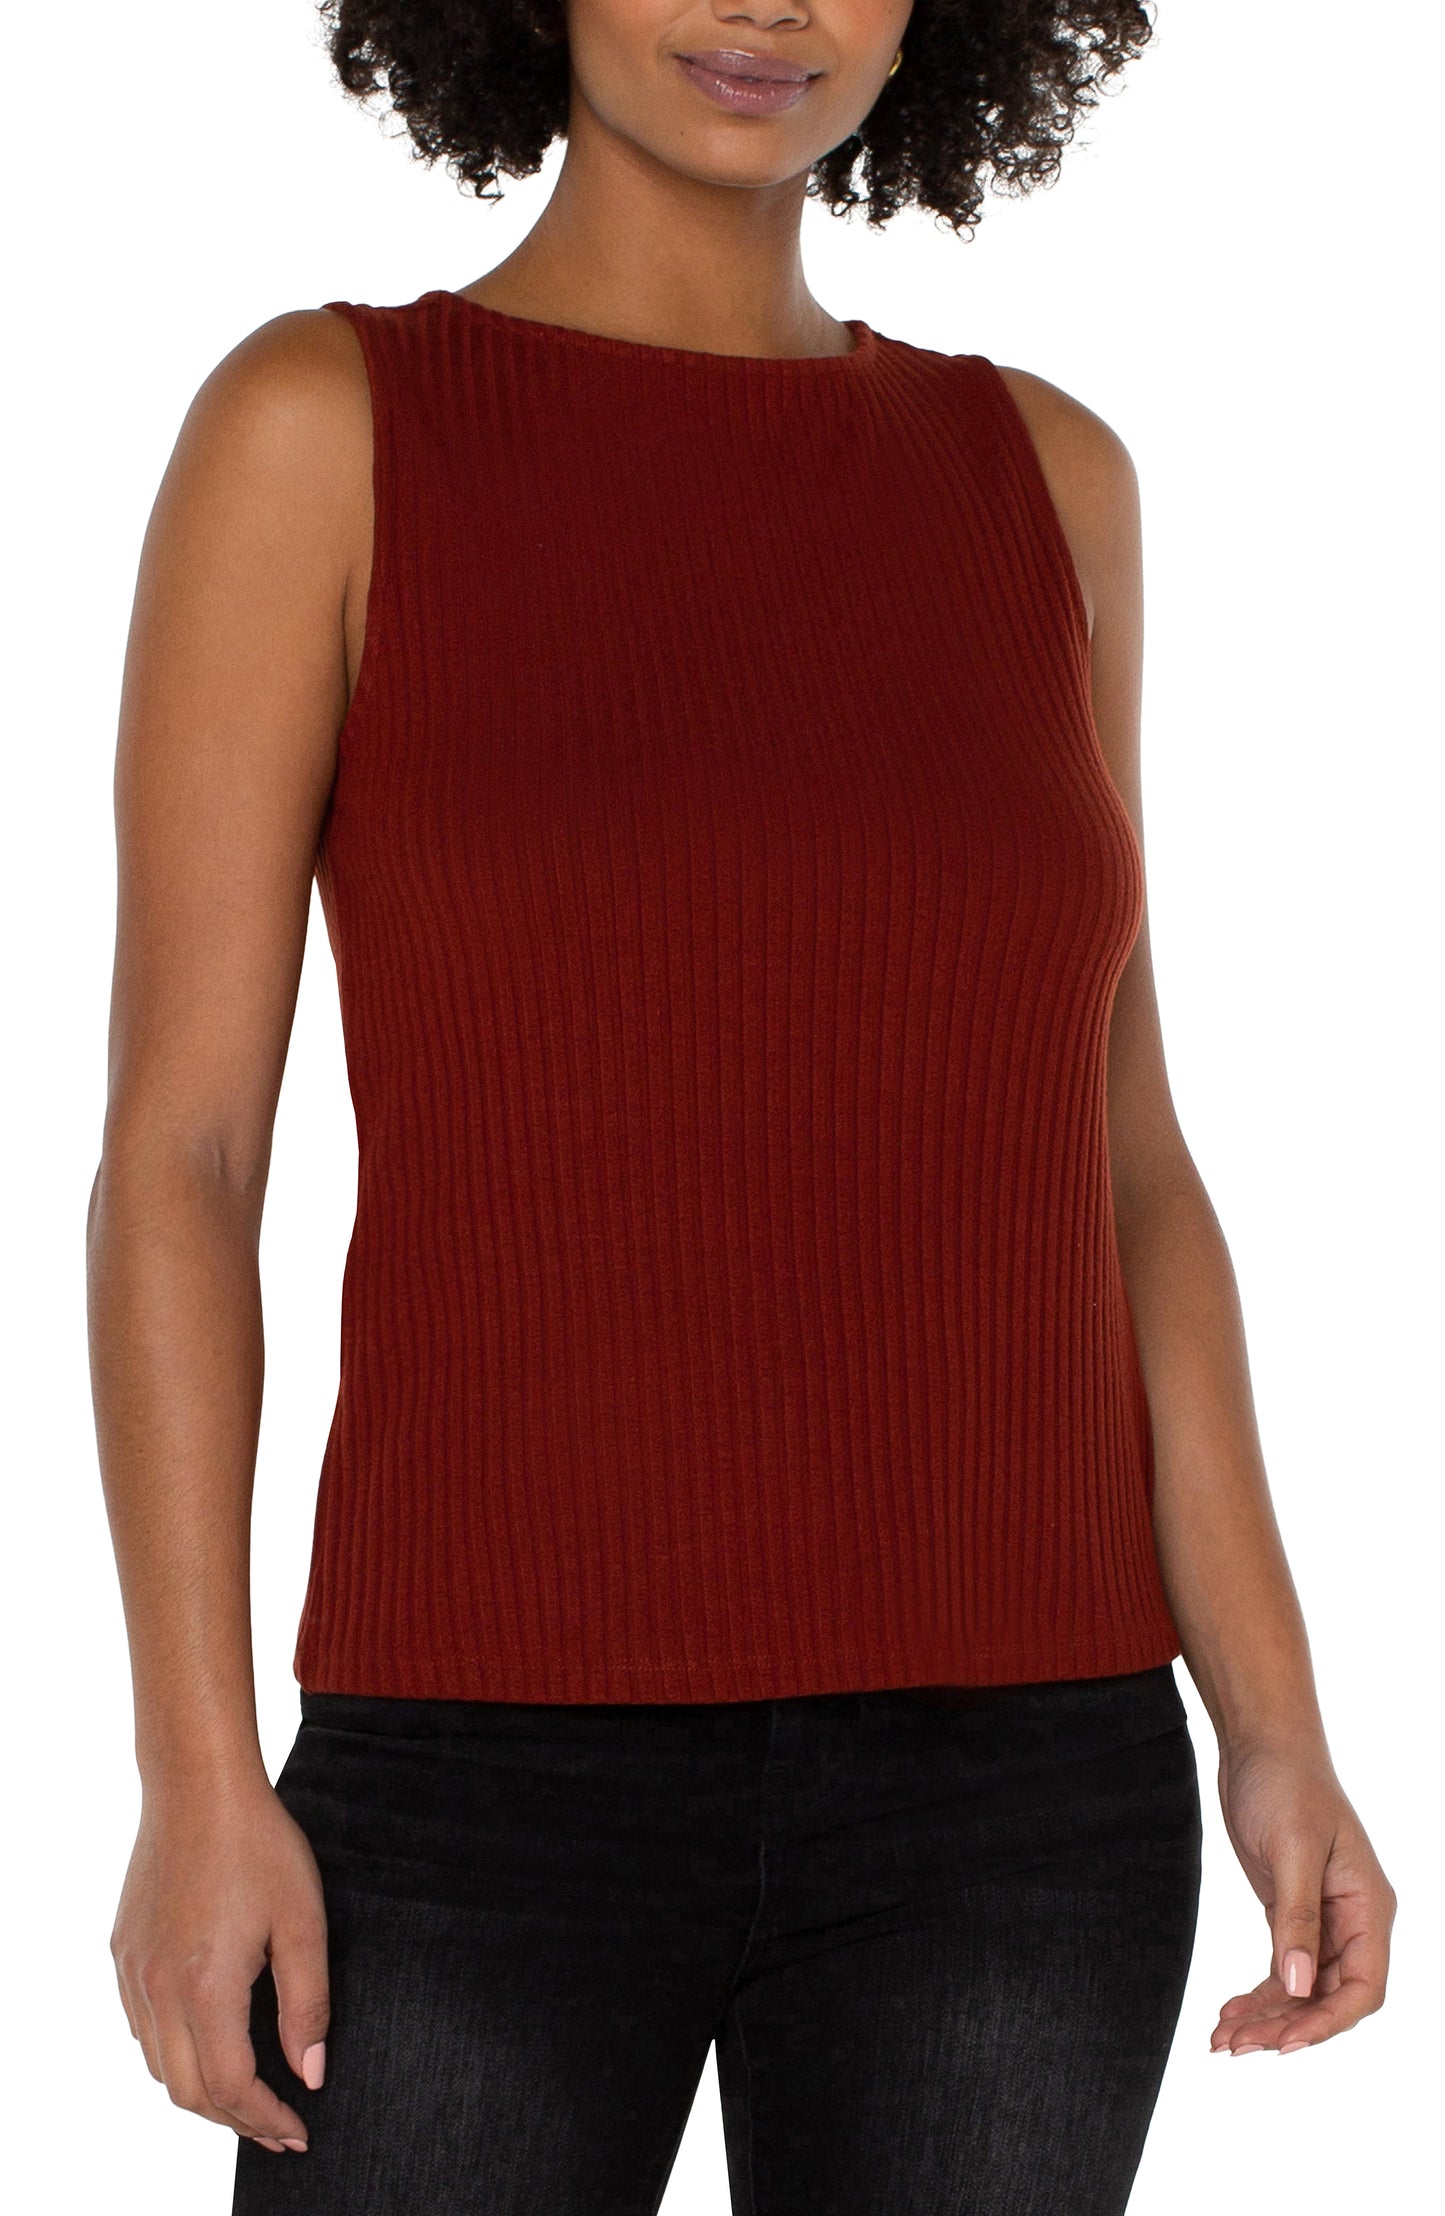 Liverpool Sleeveless Boat Neck Rib Knit Top (Solids)